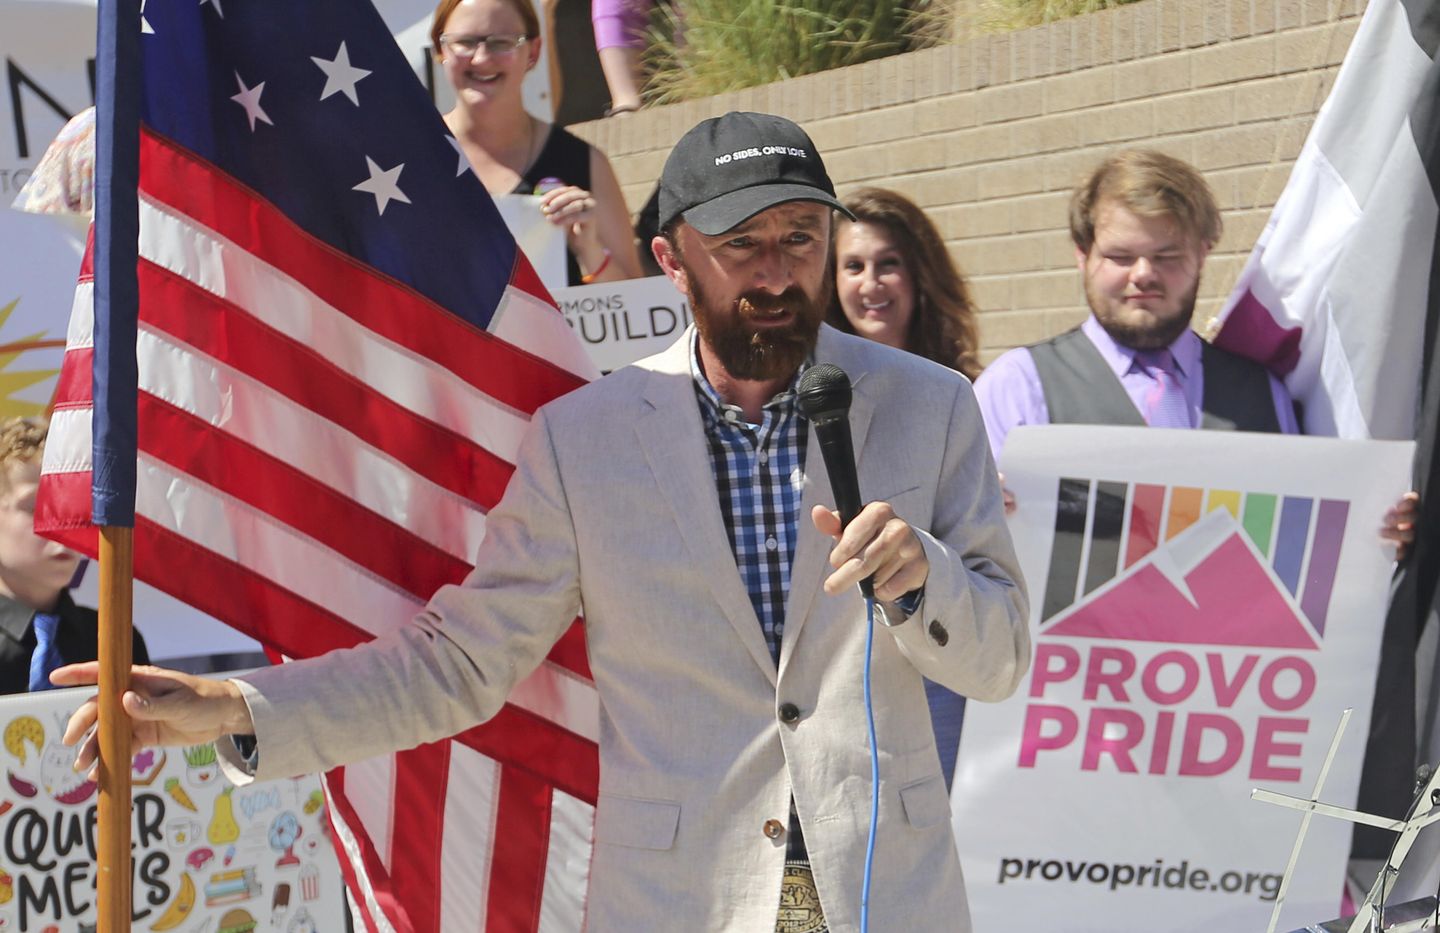 Republican who got here out as homosexual in Utah ousted in predominant